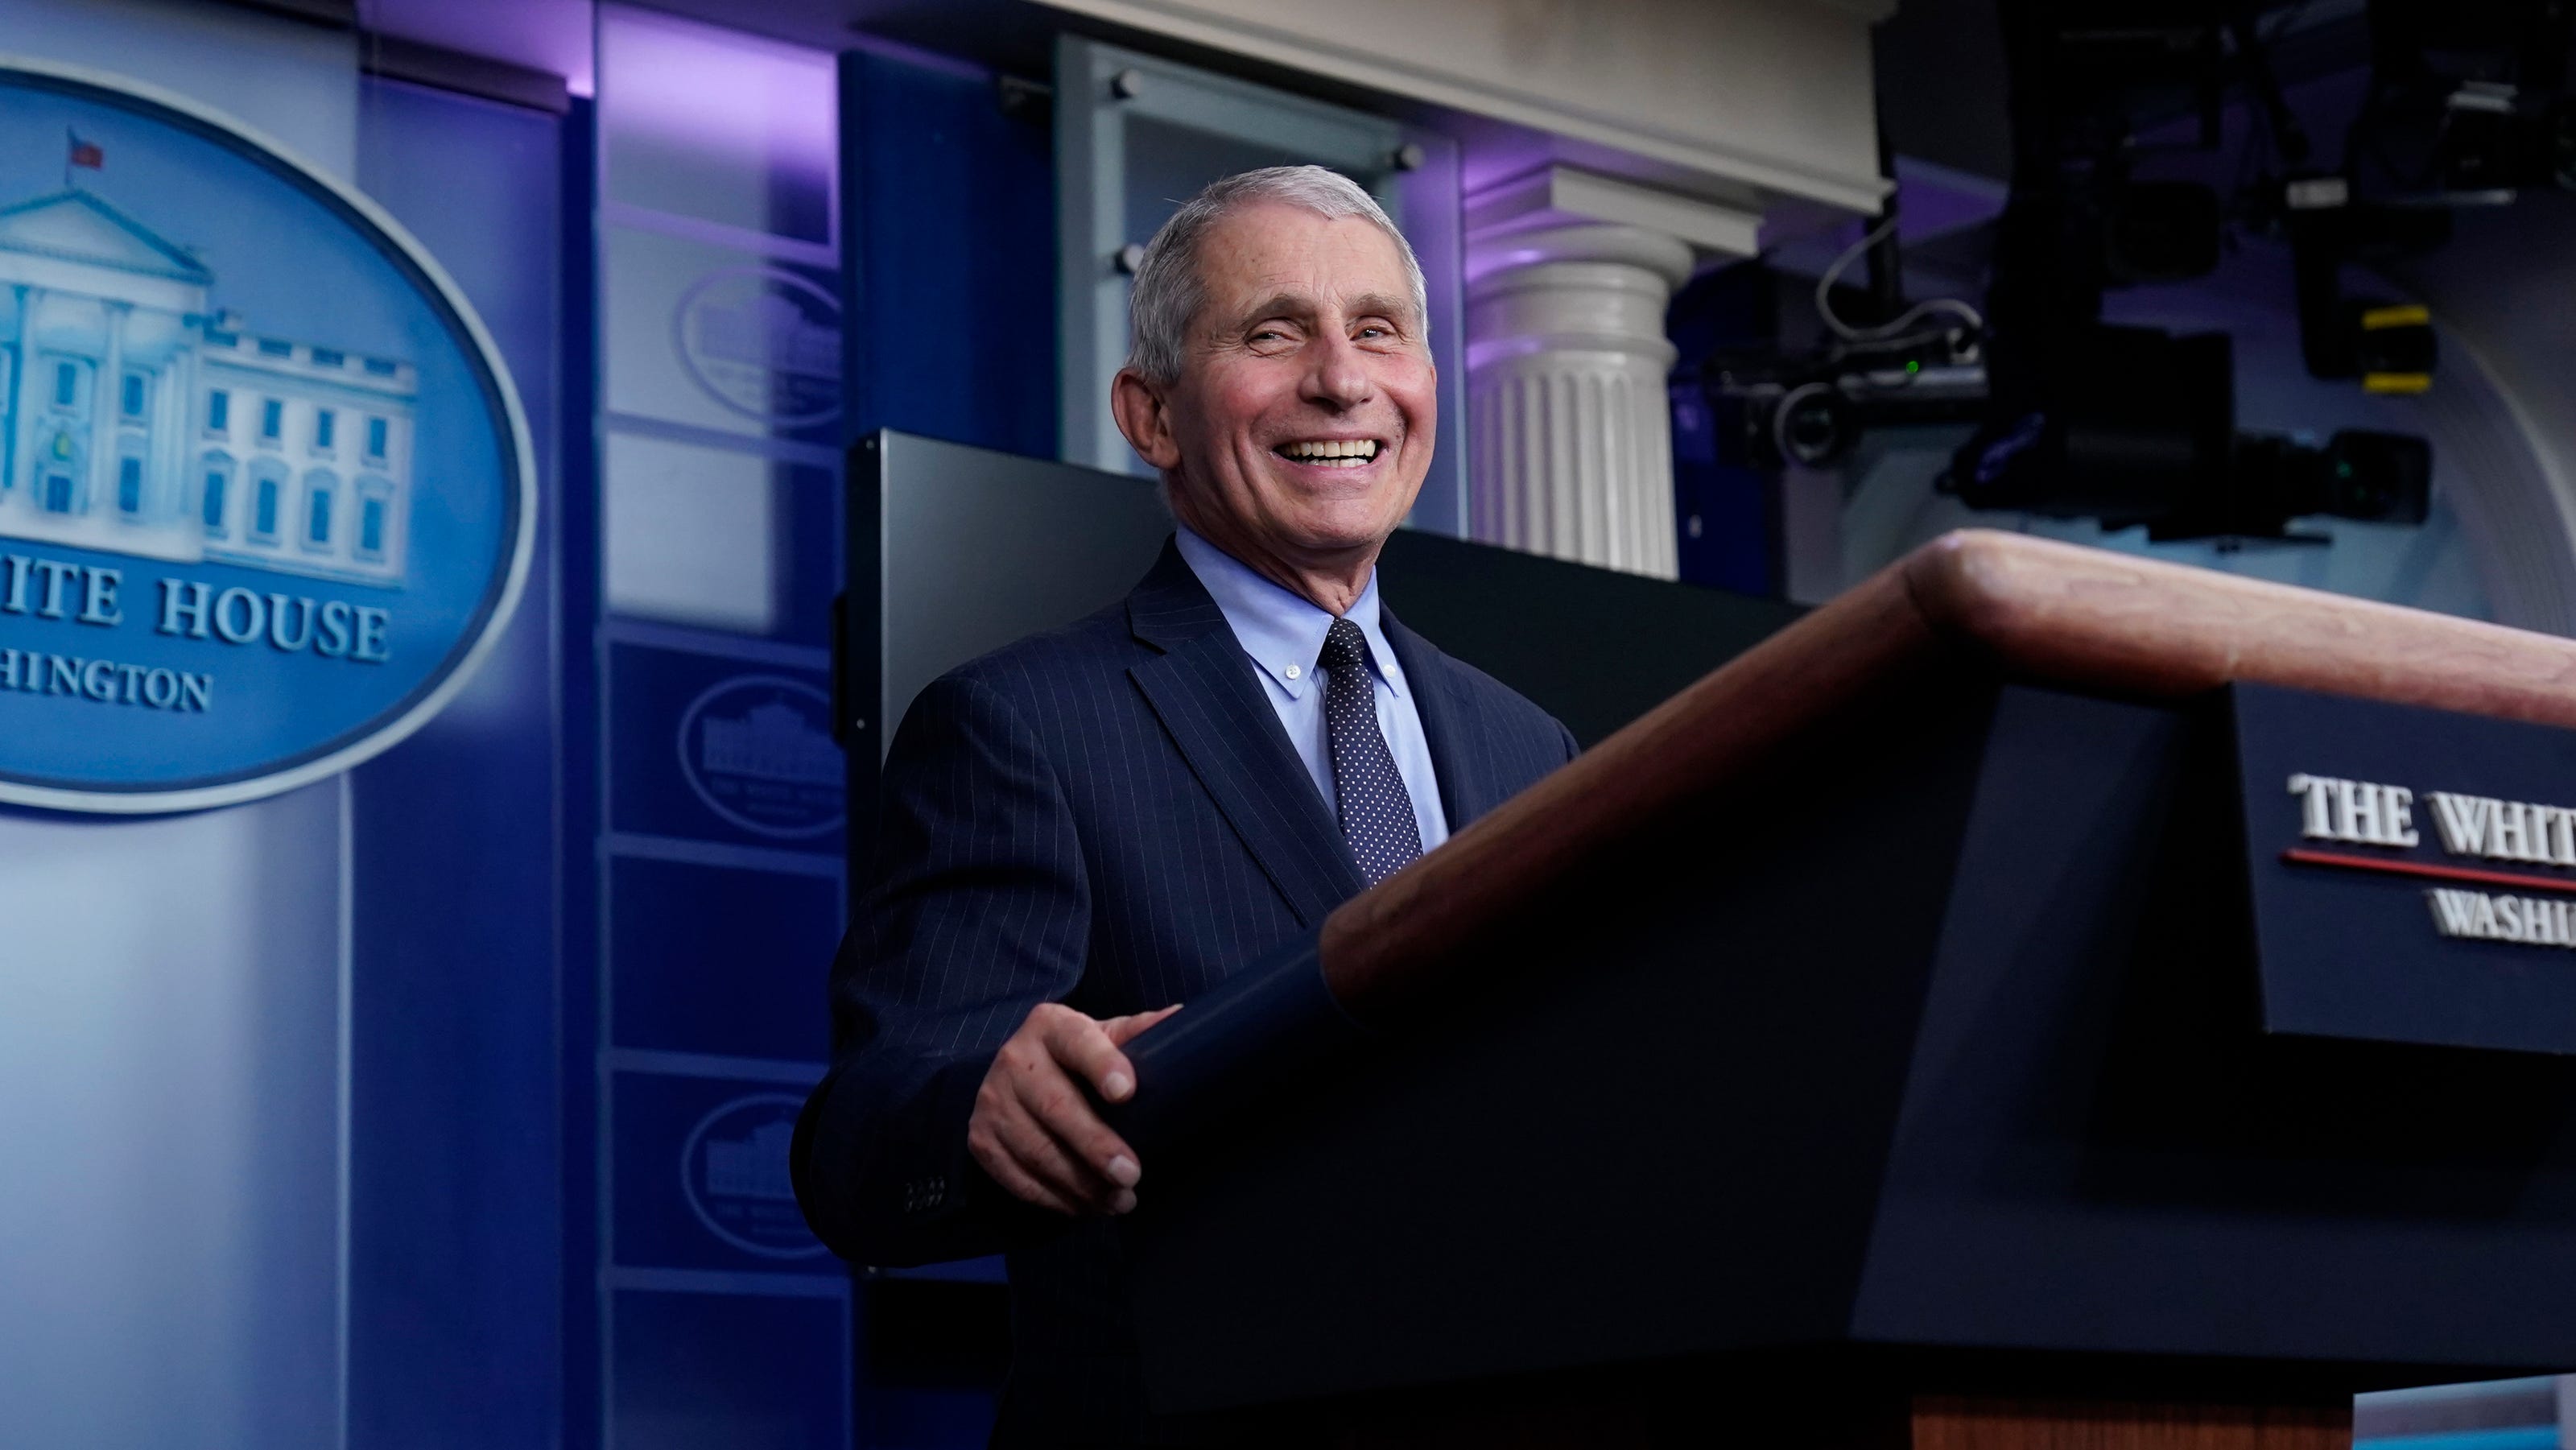 Anthony Fauci: Speaking about COVID 'liberating' under Biden vs. Trump